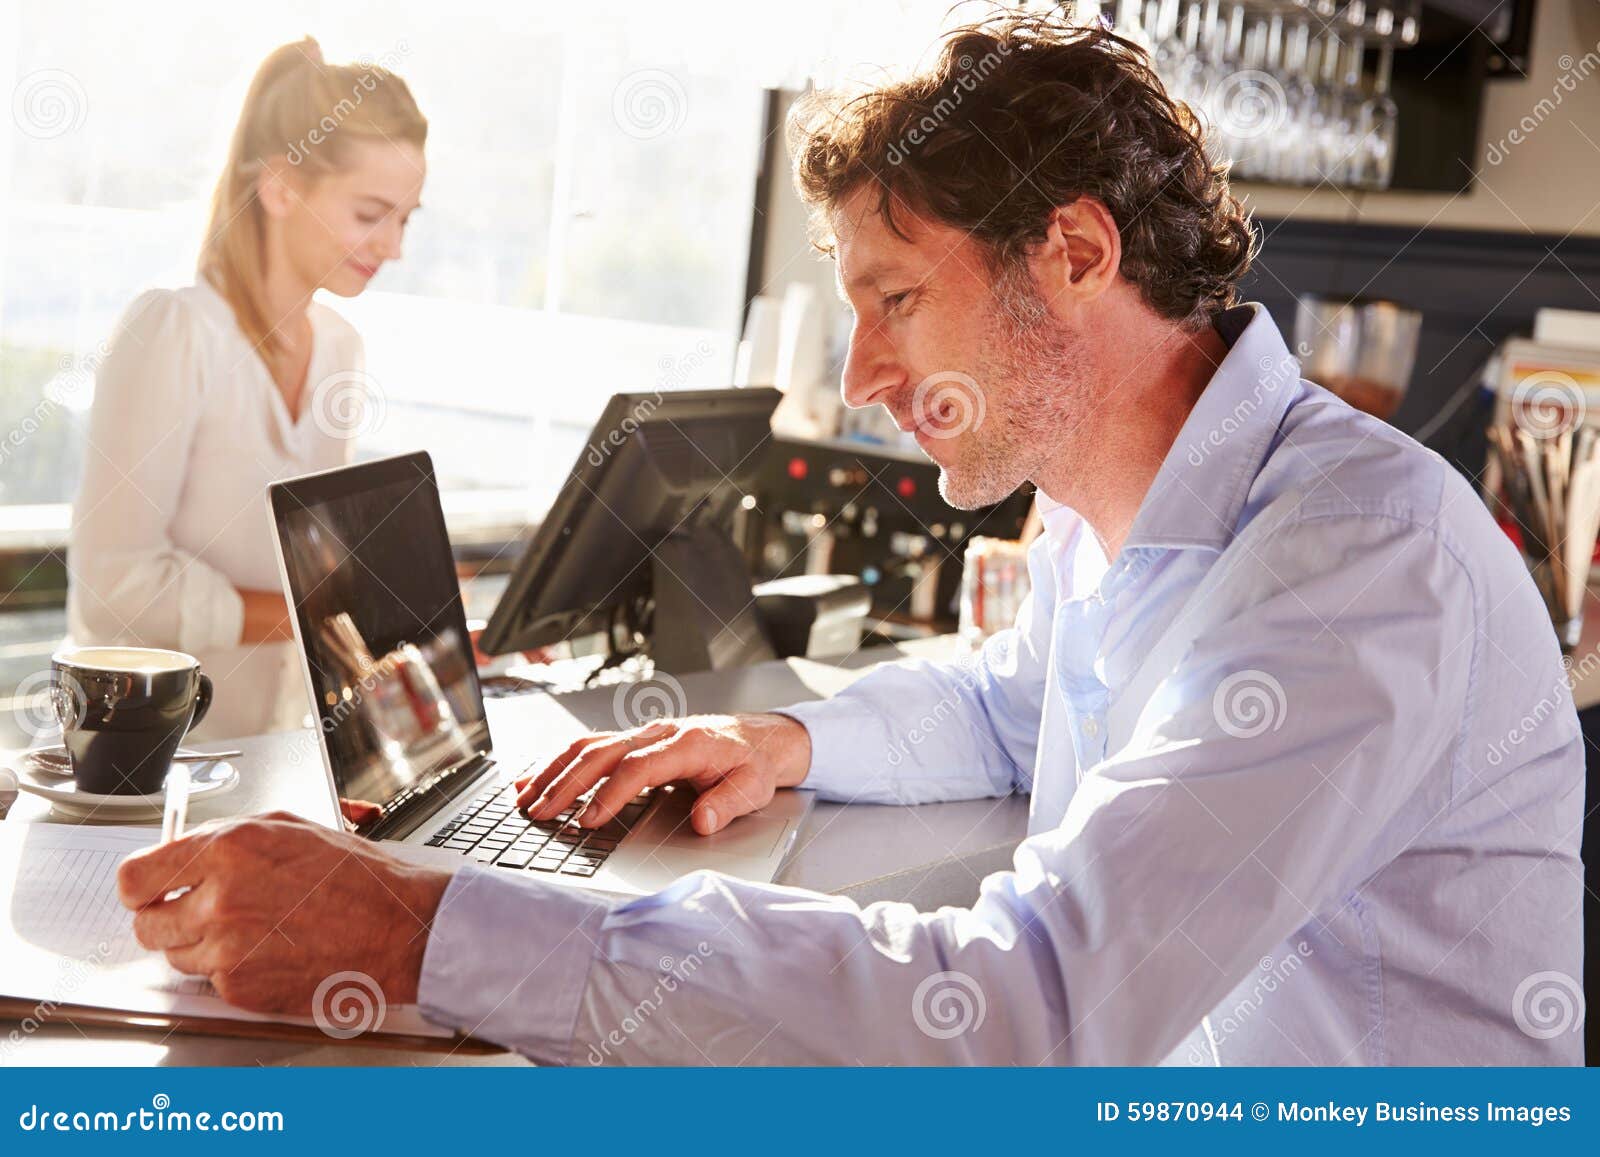 male restaurant manager working on laptop